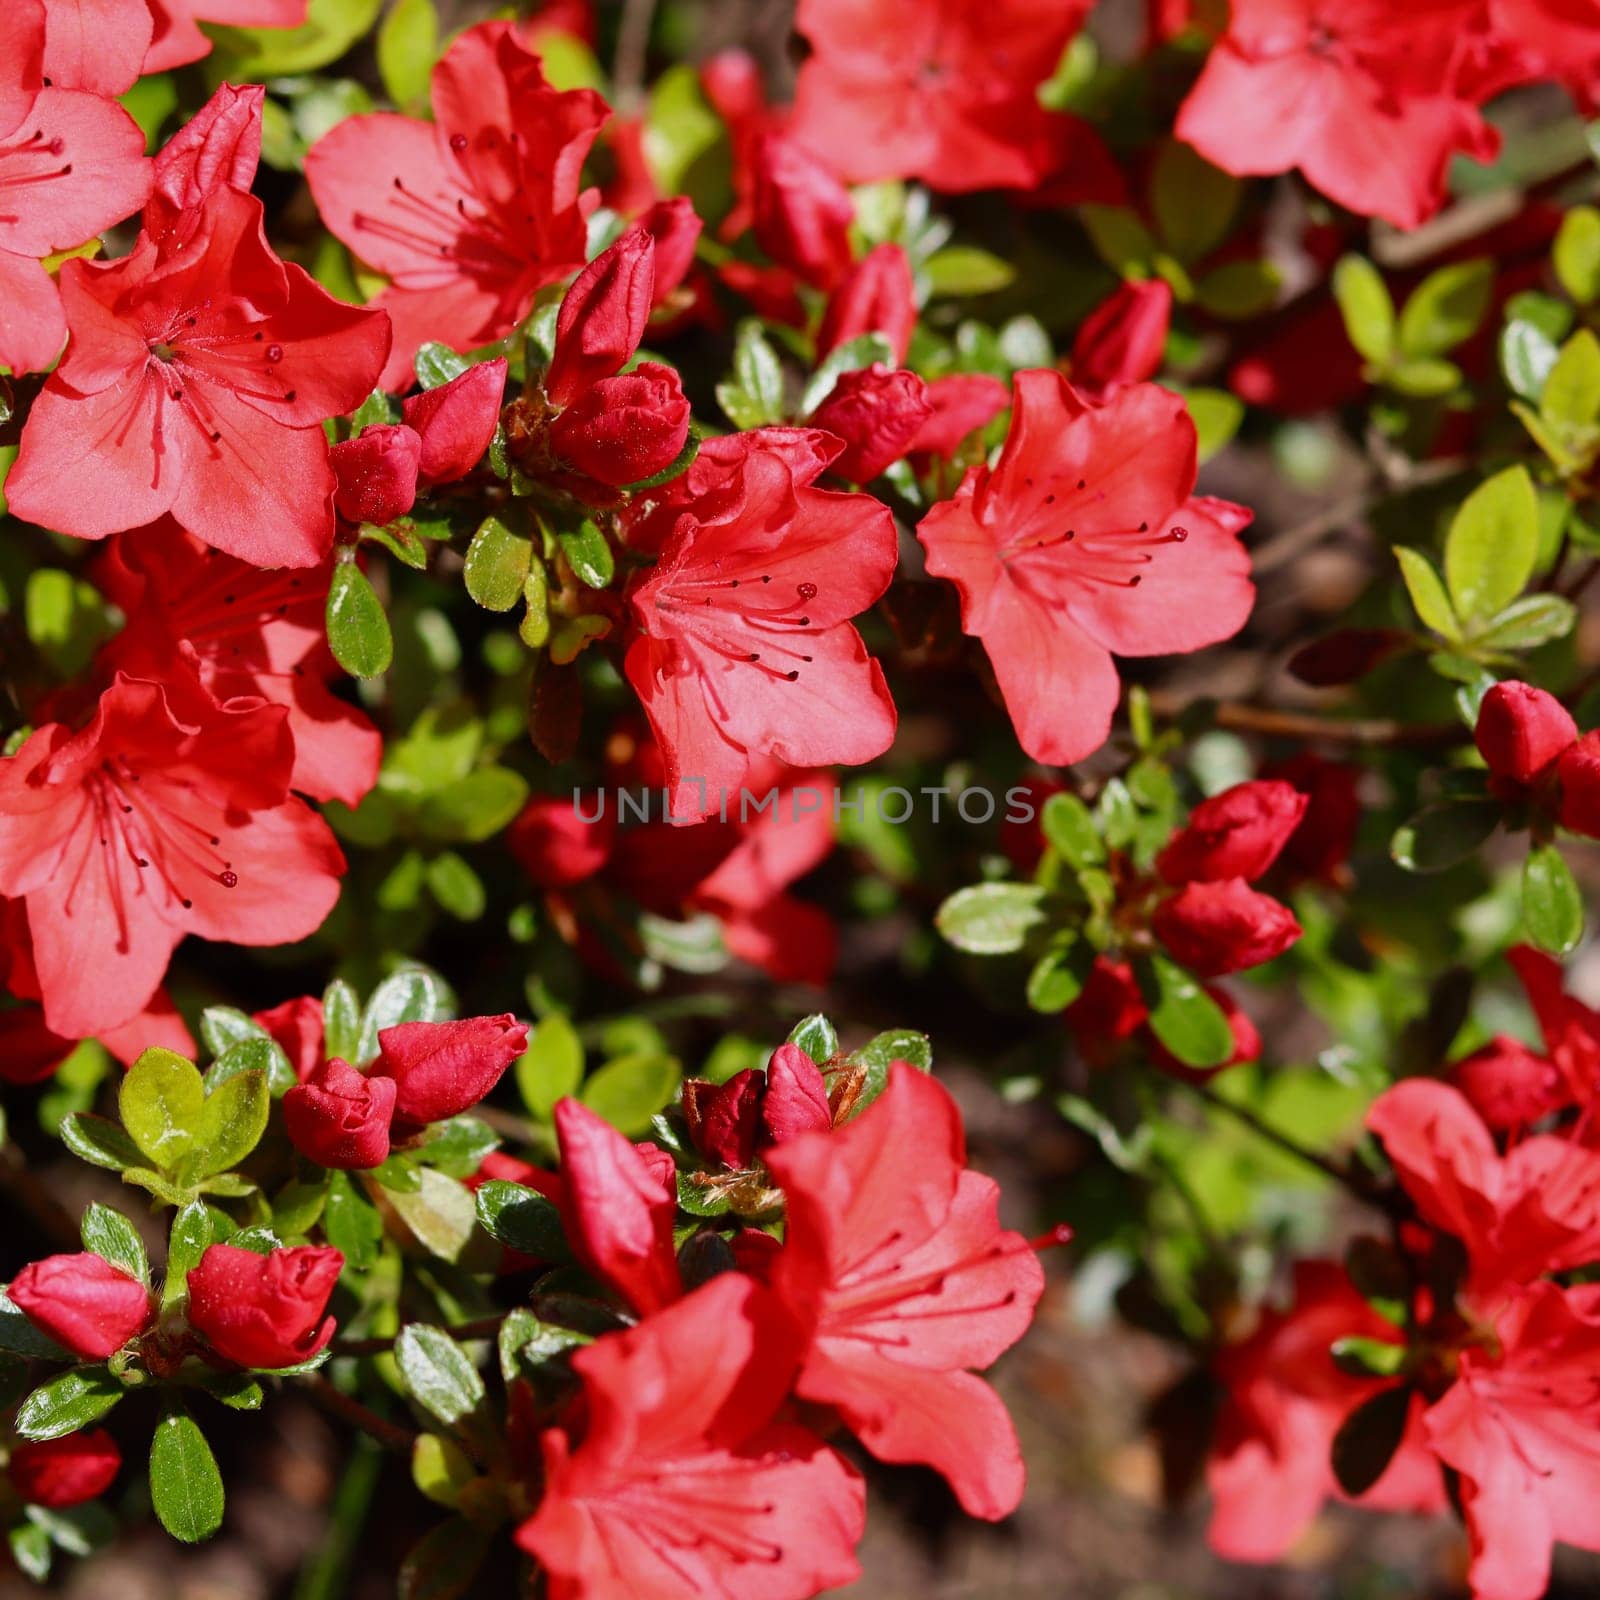 Blooming red azalea flowers in the spring garden. Gardening concept by Olayola